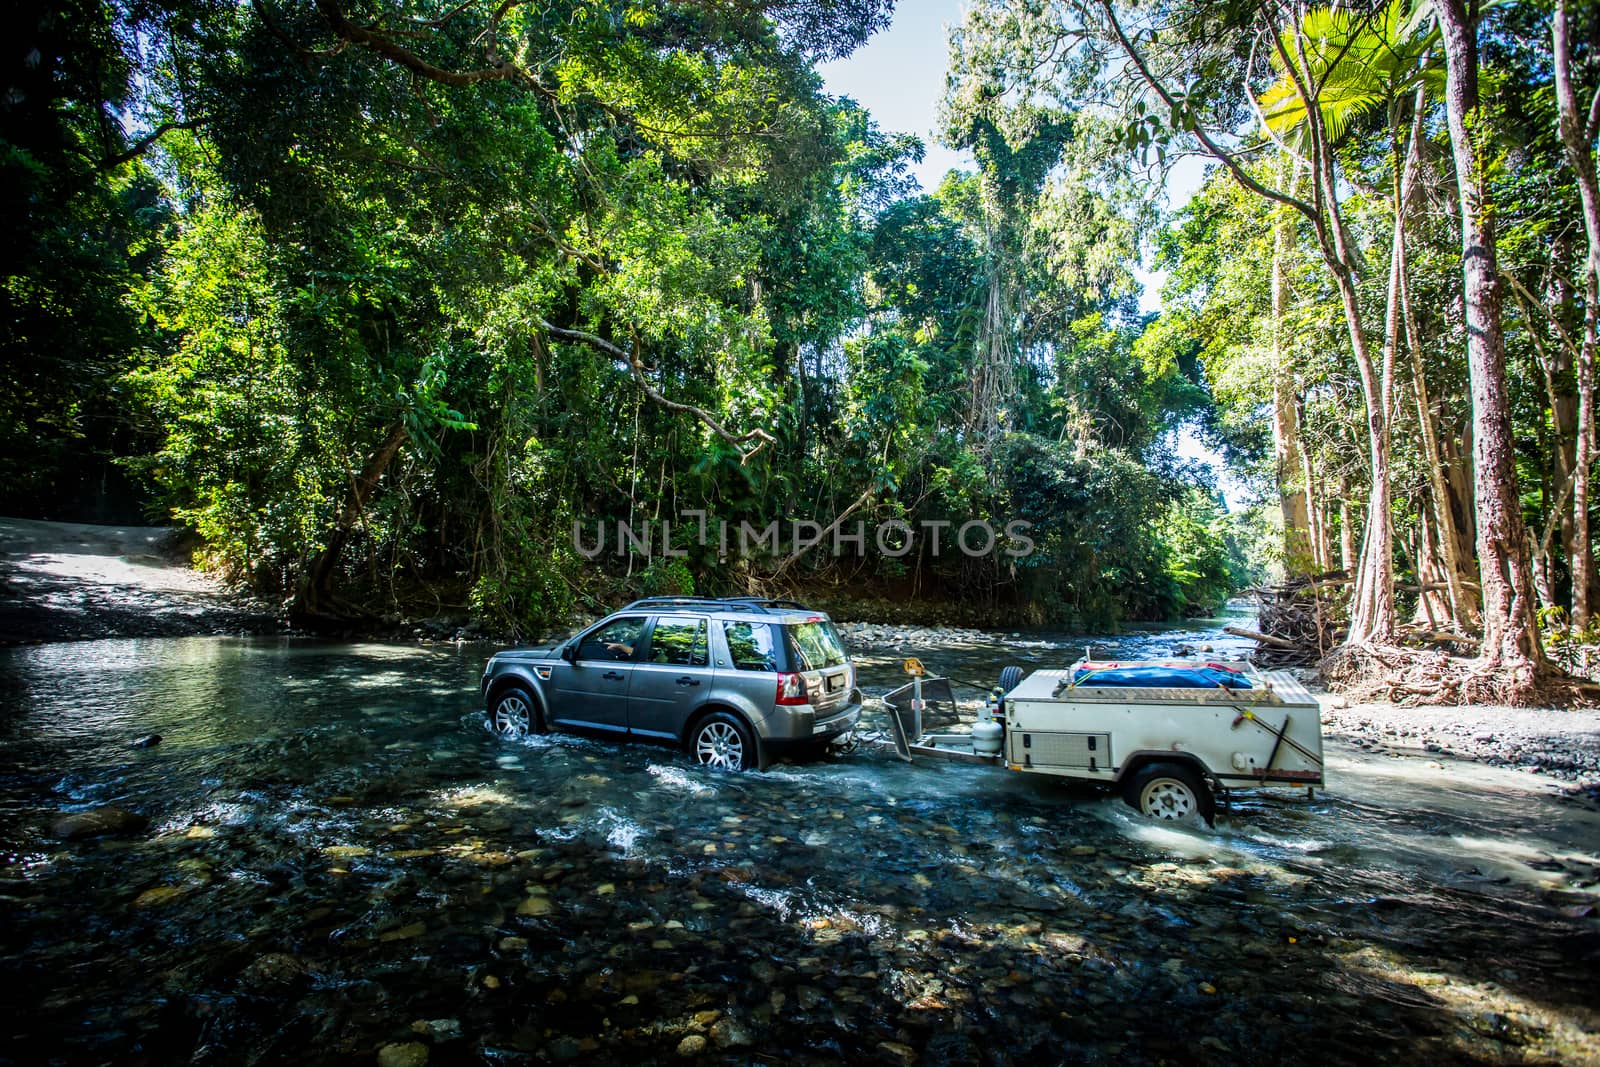 A car drives along Cape Tribulation Rd and crosses a river near Cape Tribulation in the Daintree, Queensland, Australia